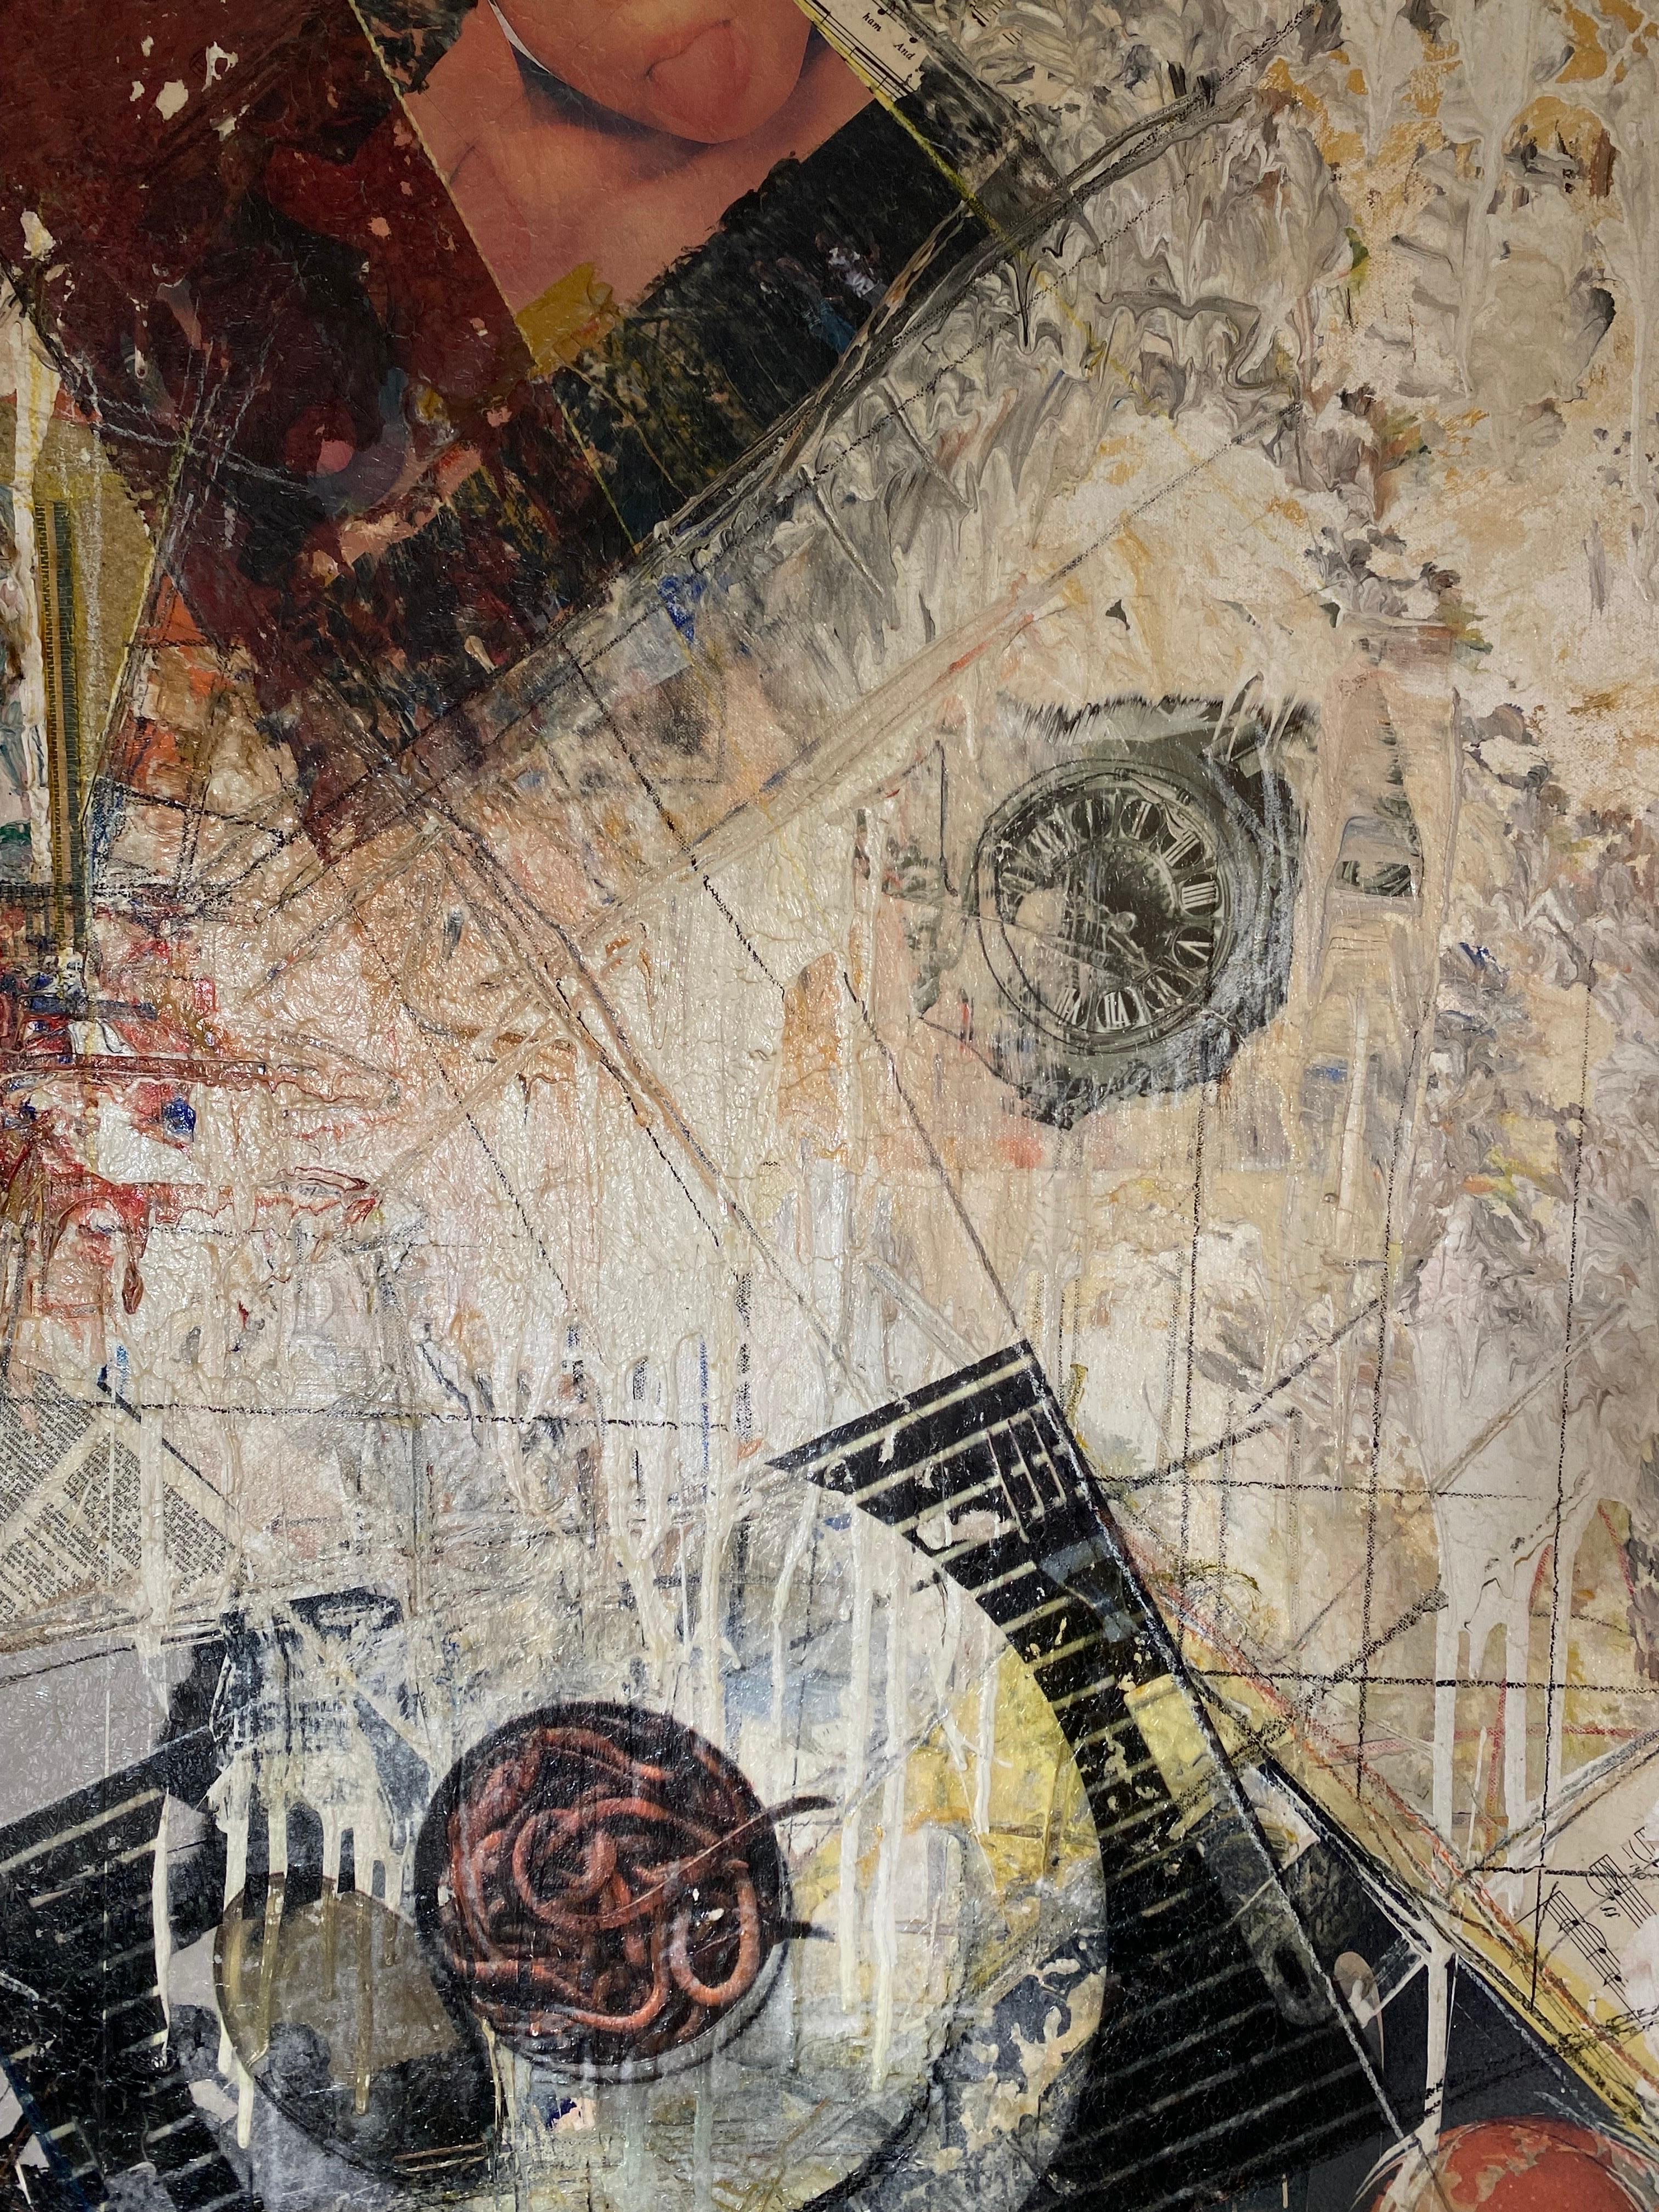 Gavin W. Sewell large mixed media collage painting. Measures: 48